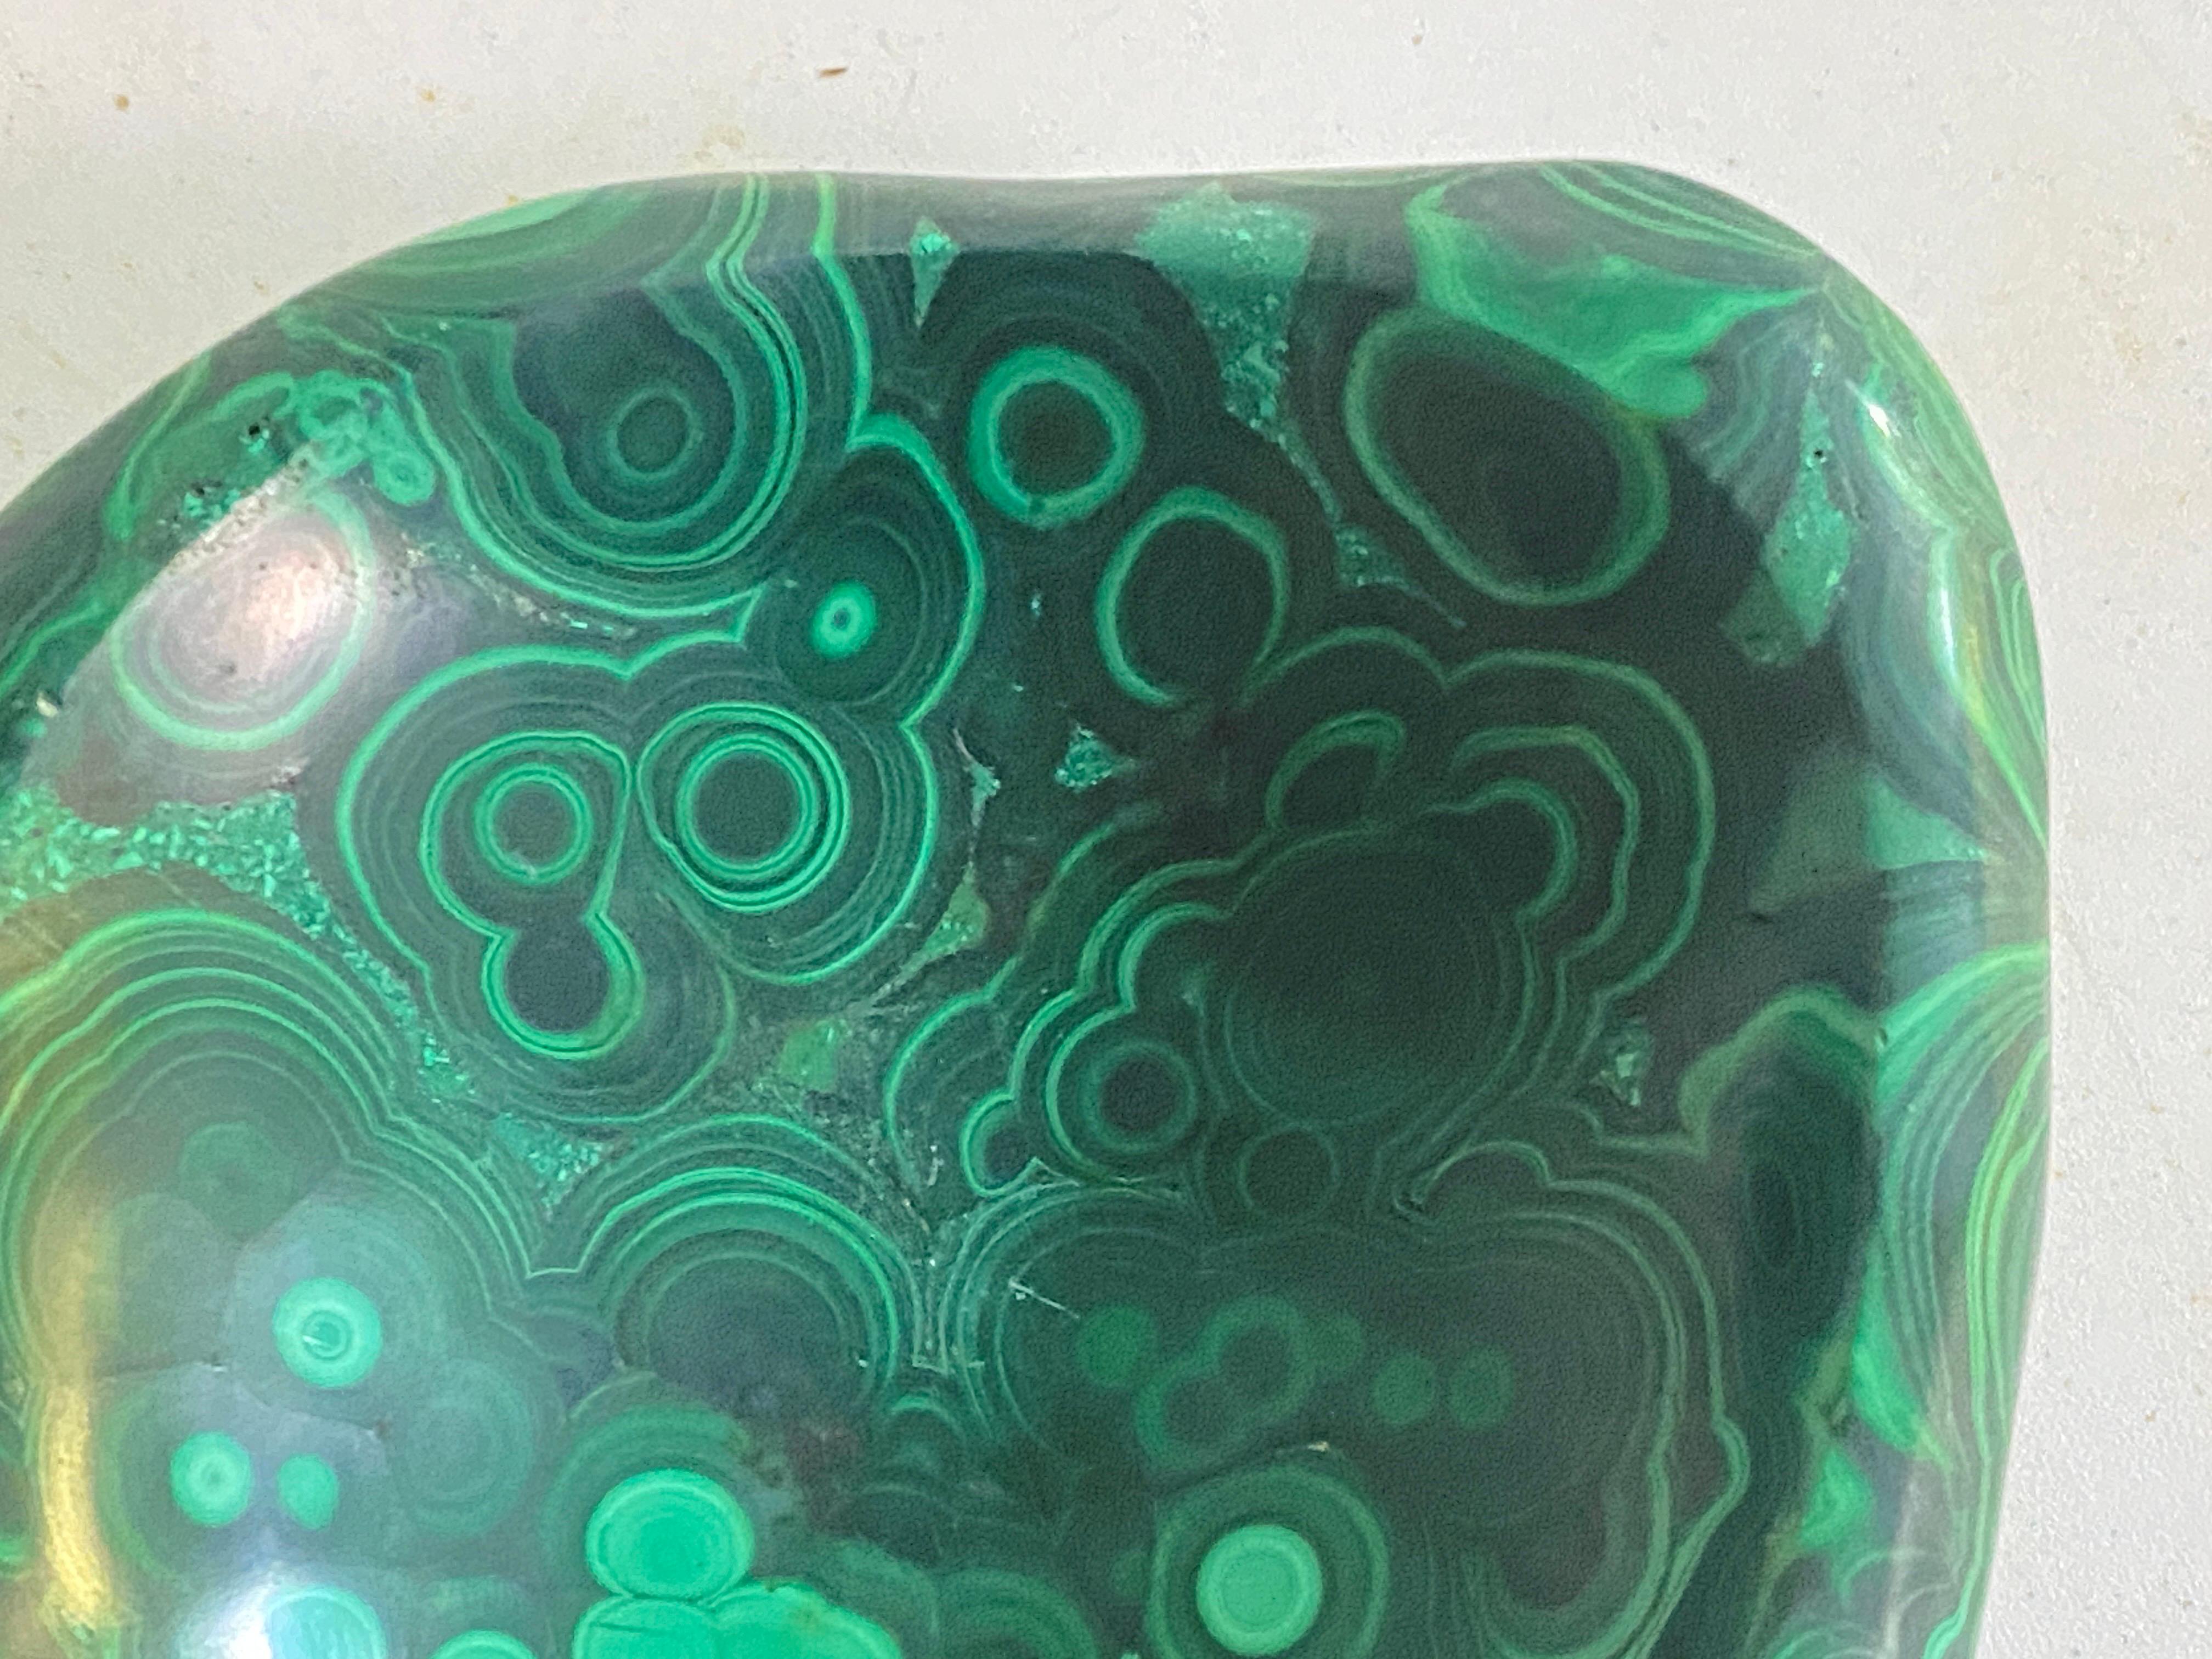 Ashtray in malachite.
it is polished, it can be used as a vide poche too.